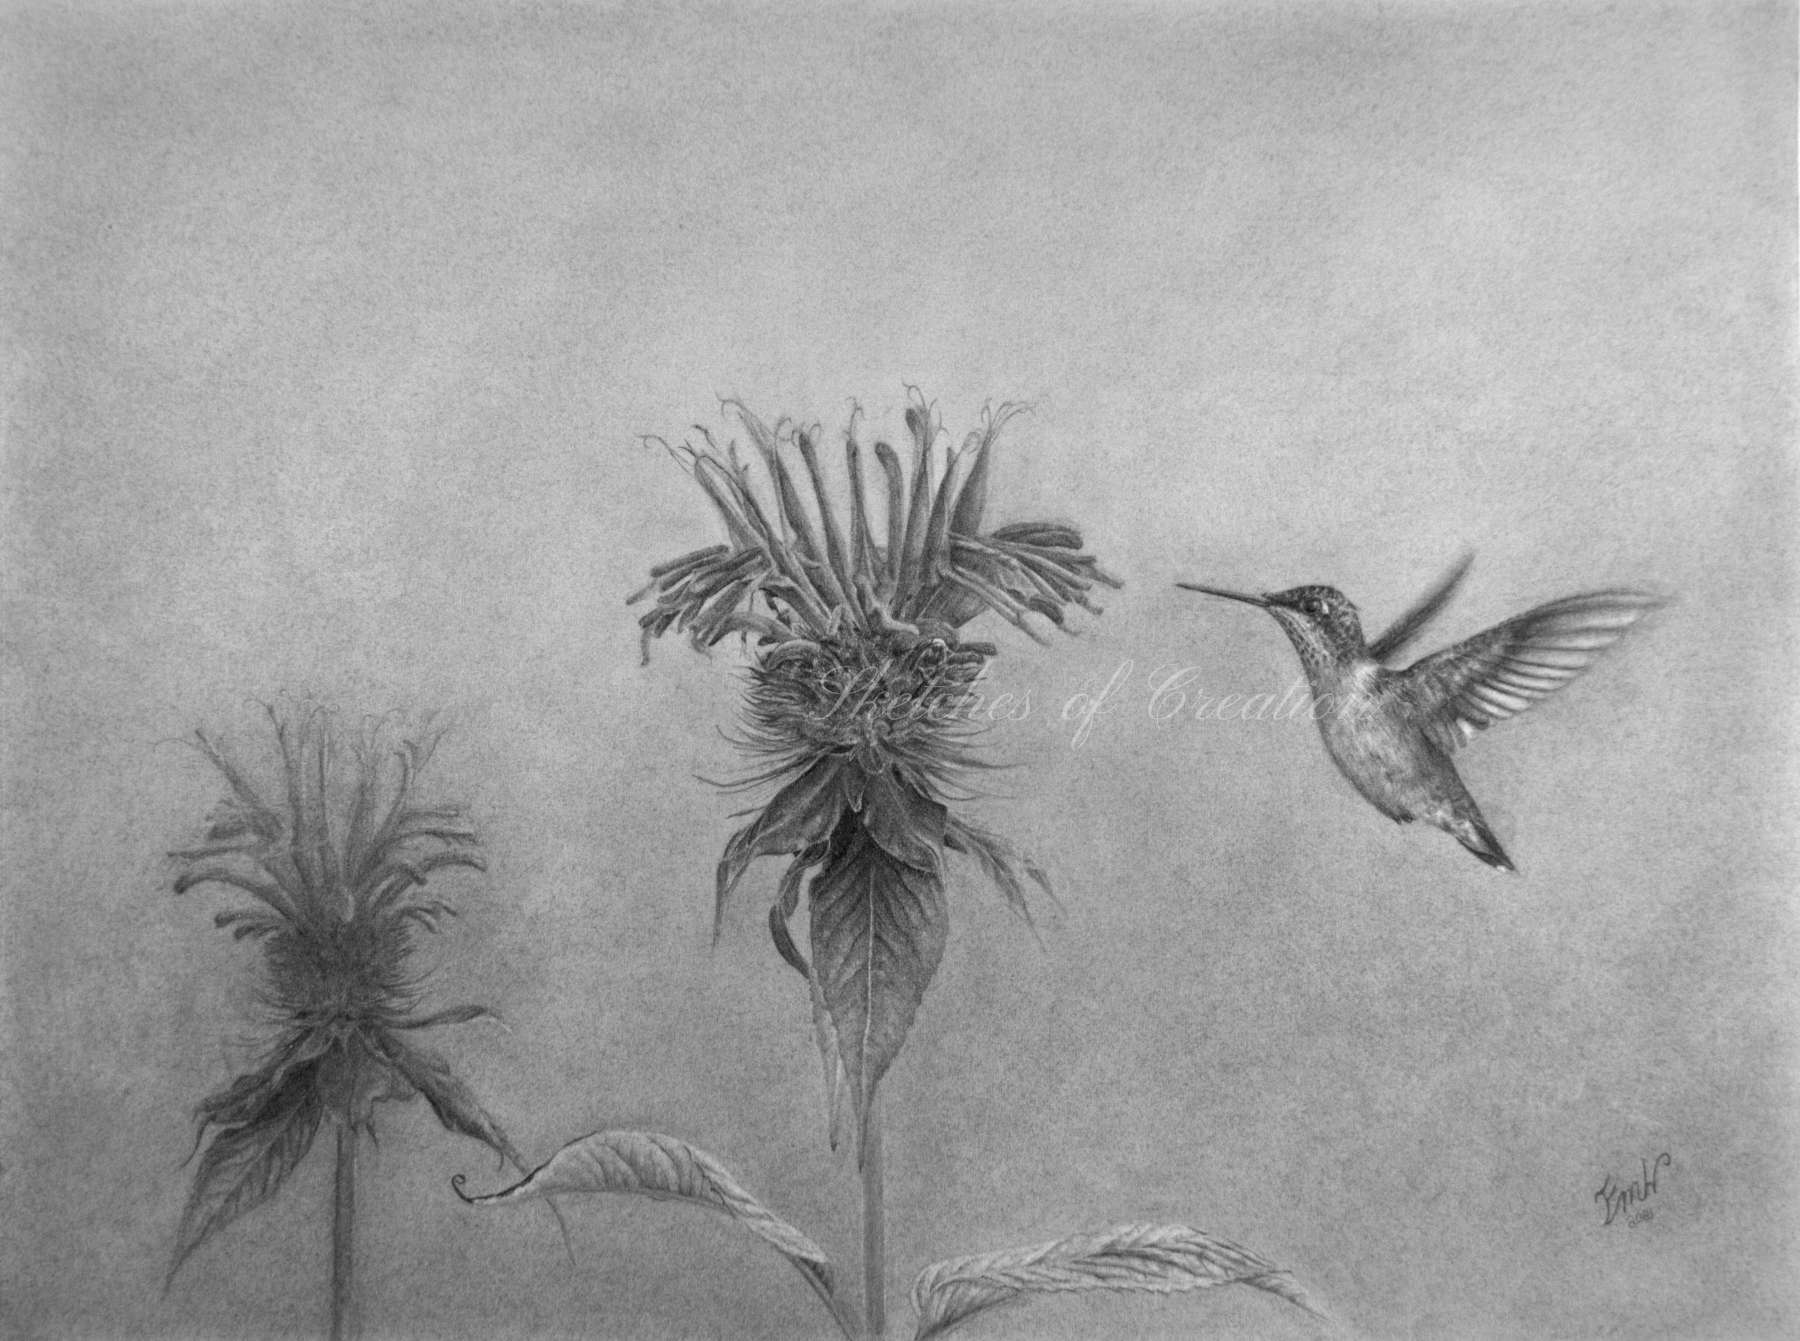 'Hummingbird with Beebalm' A drawing of a ruby-throated hummingbird hovering next to a beebalm flower